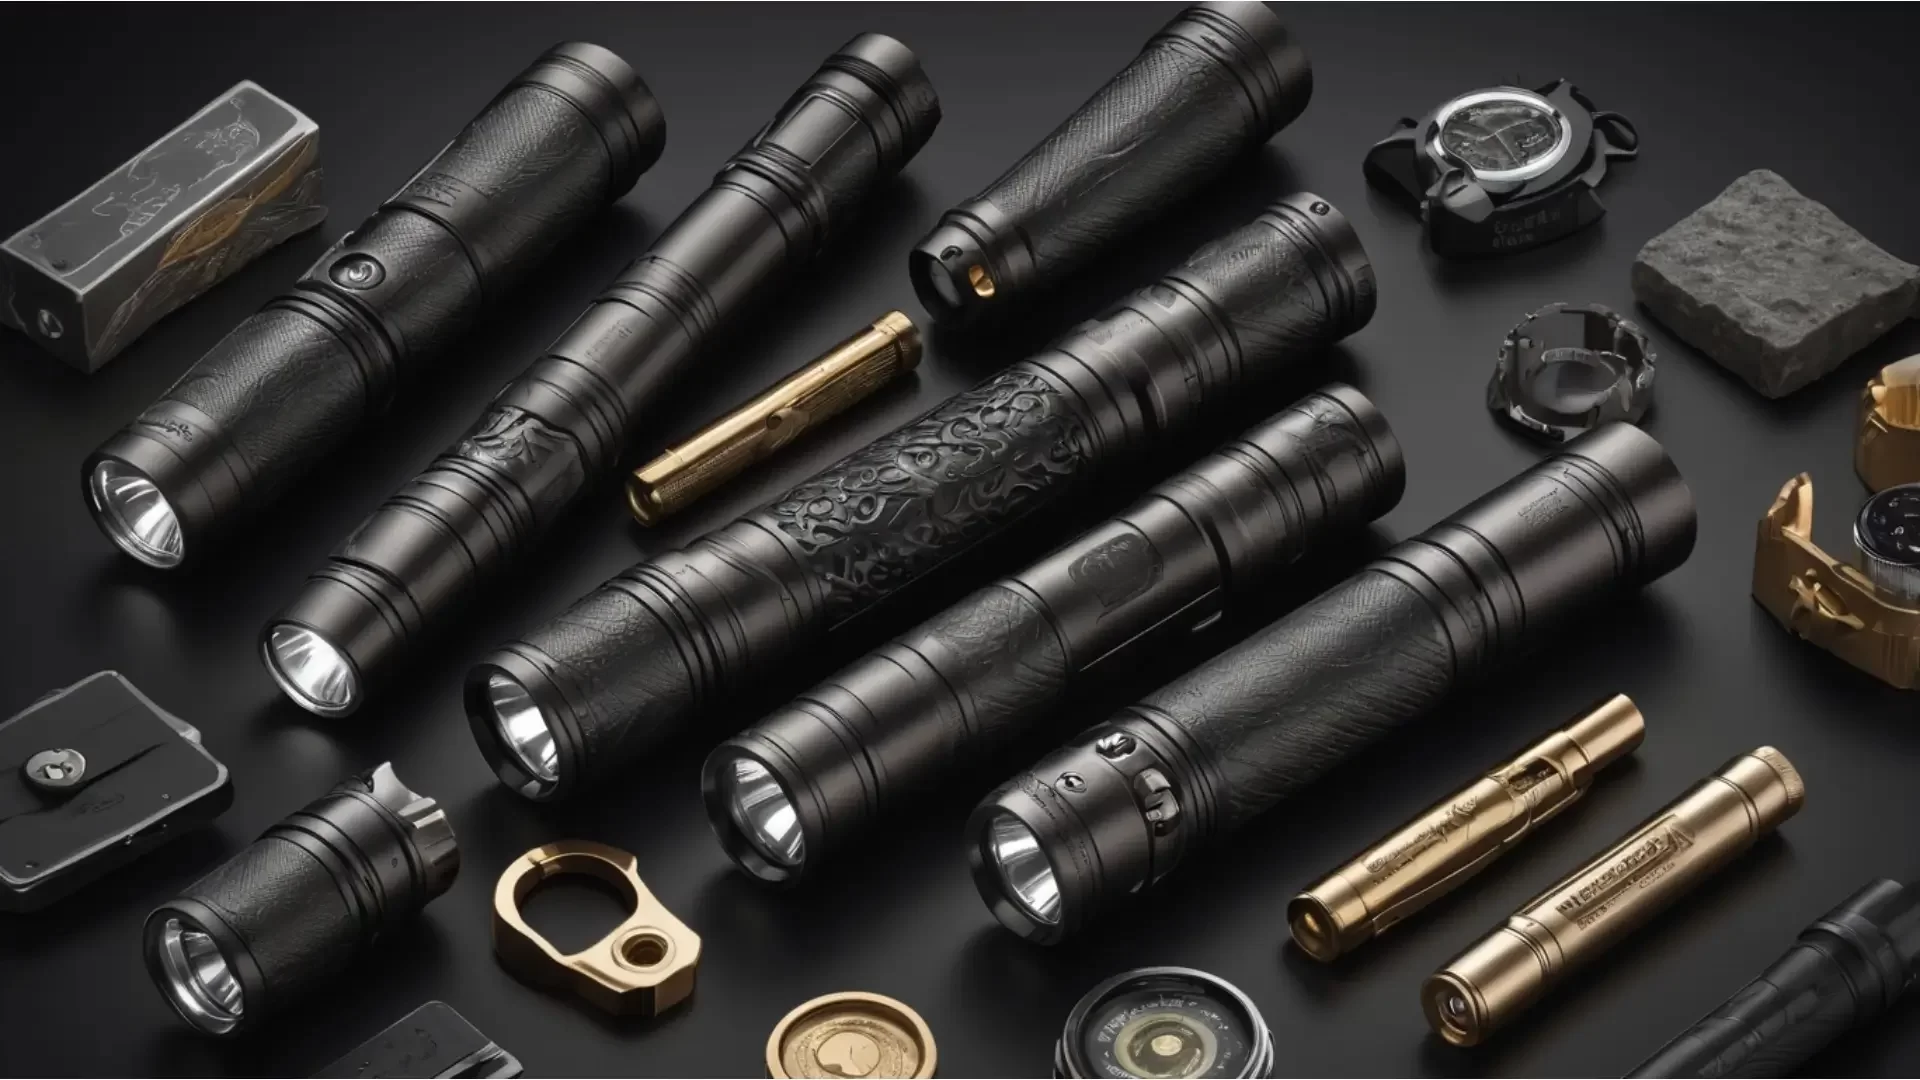 A group of Best EDC Flashlights